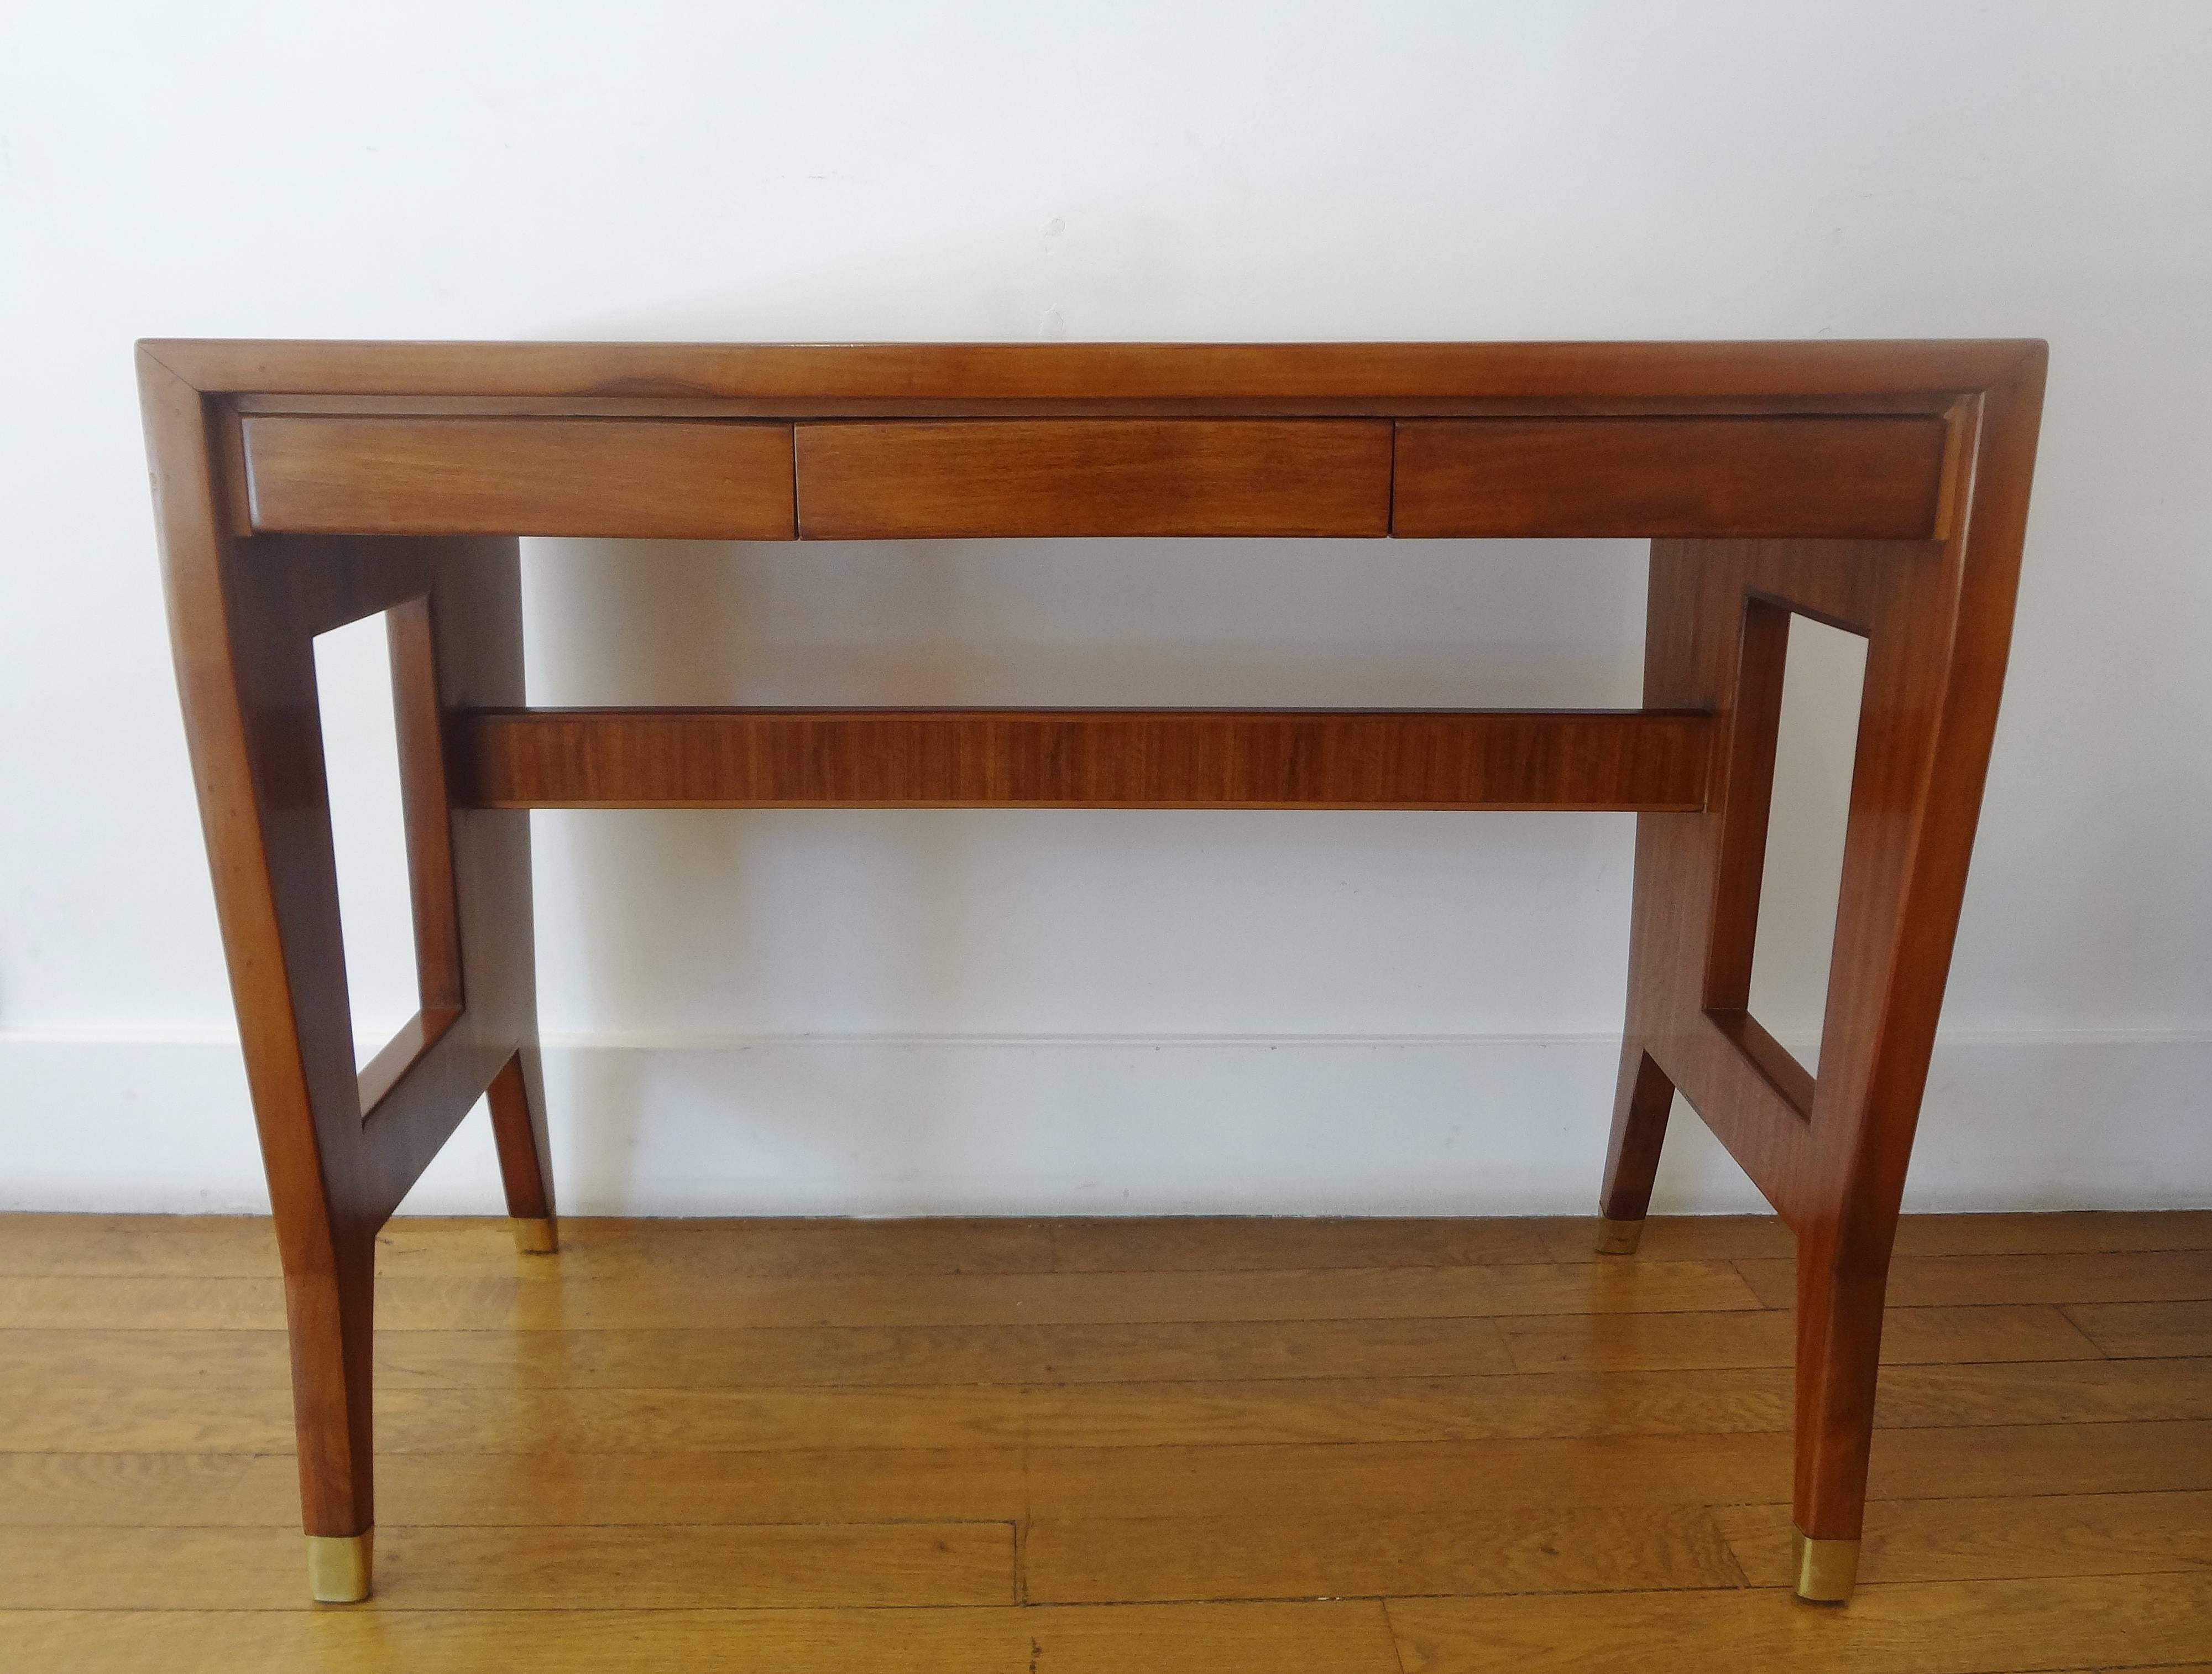 Small rectangular blond mahogany desk, 1955, by Gio Ponti (1891-1979) 
Geometric open sides, with upper cross-bar and gilt brass sabots.
Opening with three front drawers.

Typical wellknown Ponti's designed profile.
Provenance: Part of the